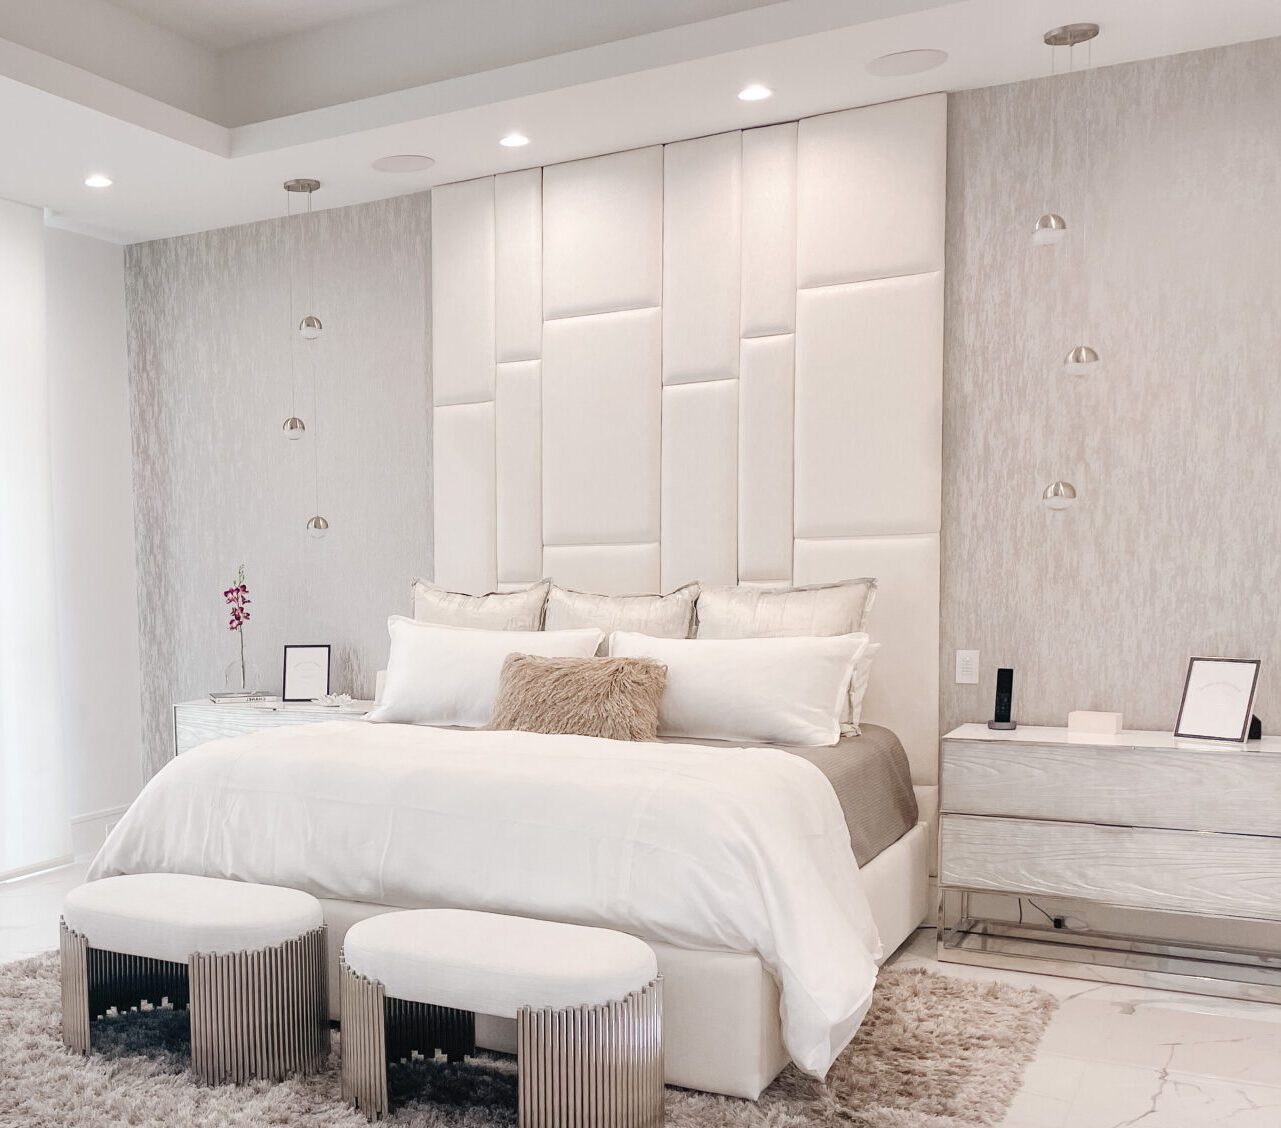 Wall Mounted Headboards - 5 Reasons Your Clients Will Love